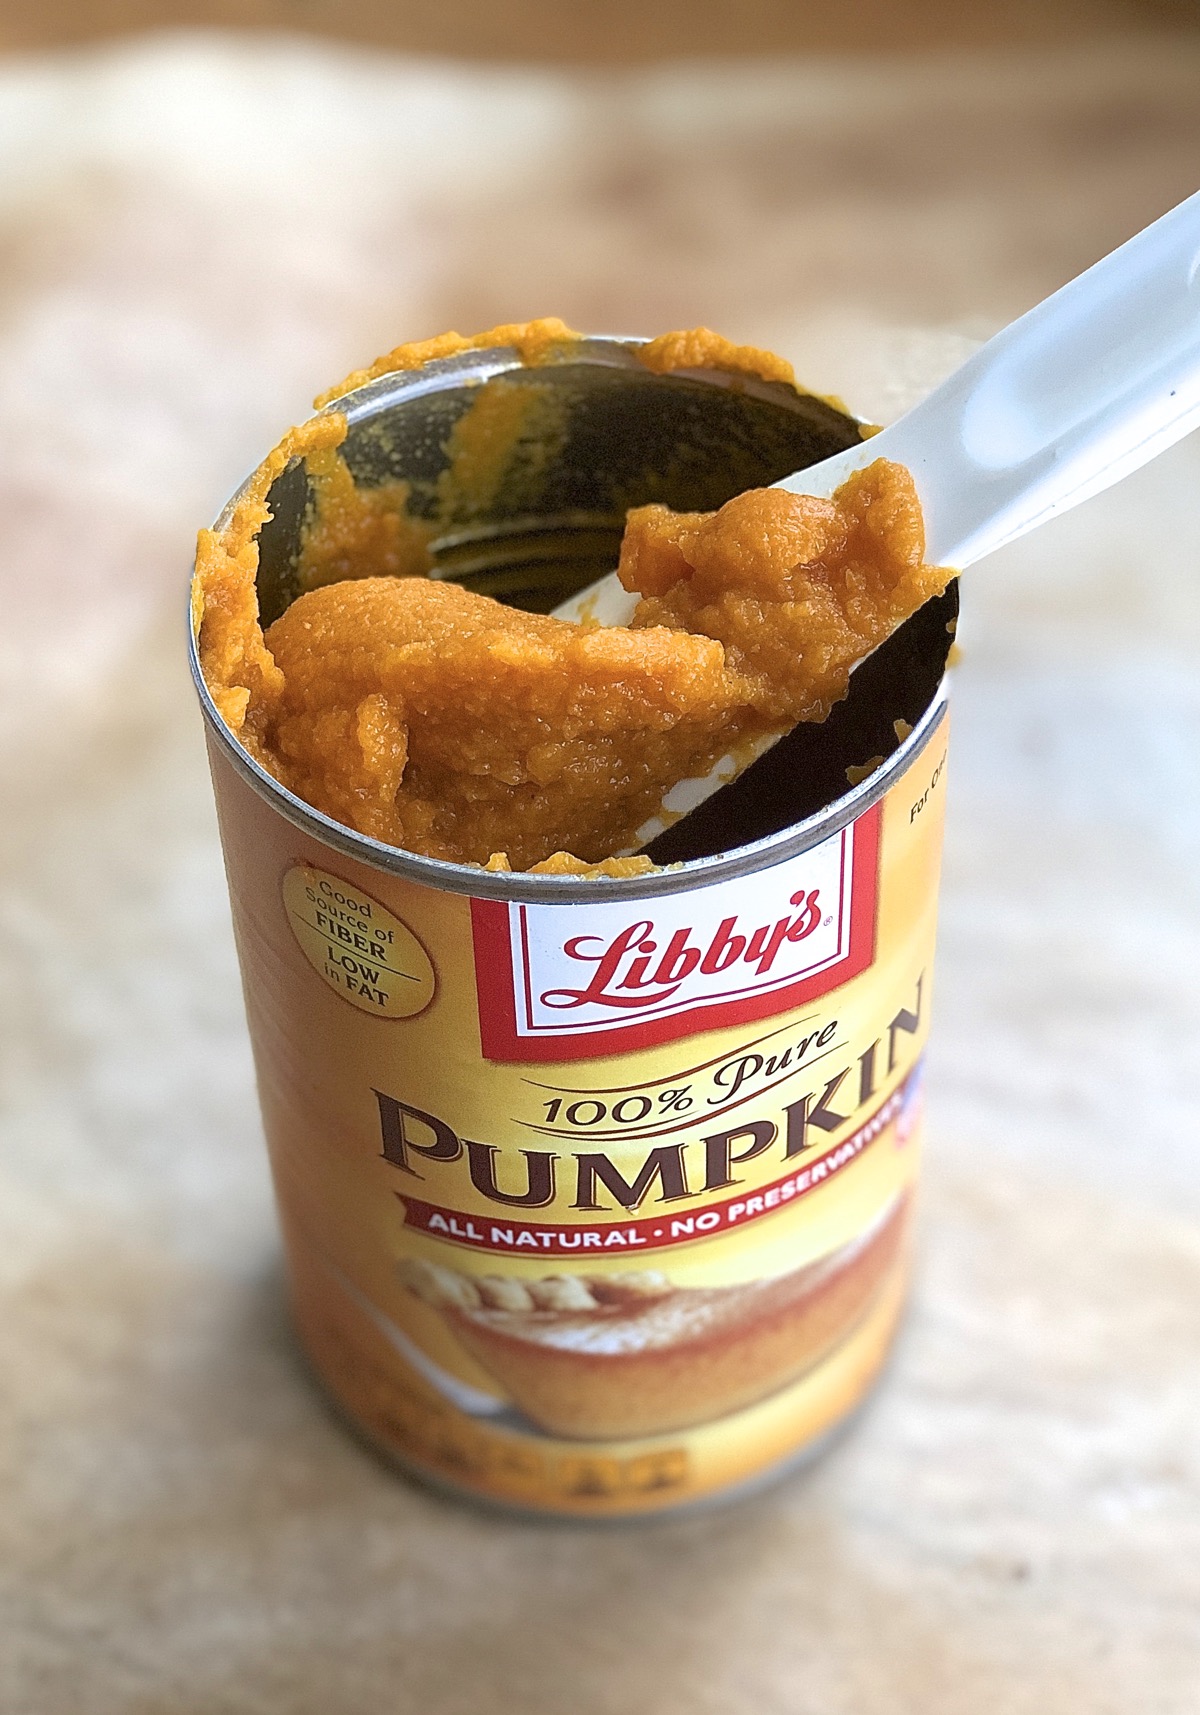 Pumpkin purée being spooned out of half-empty pumpkin can